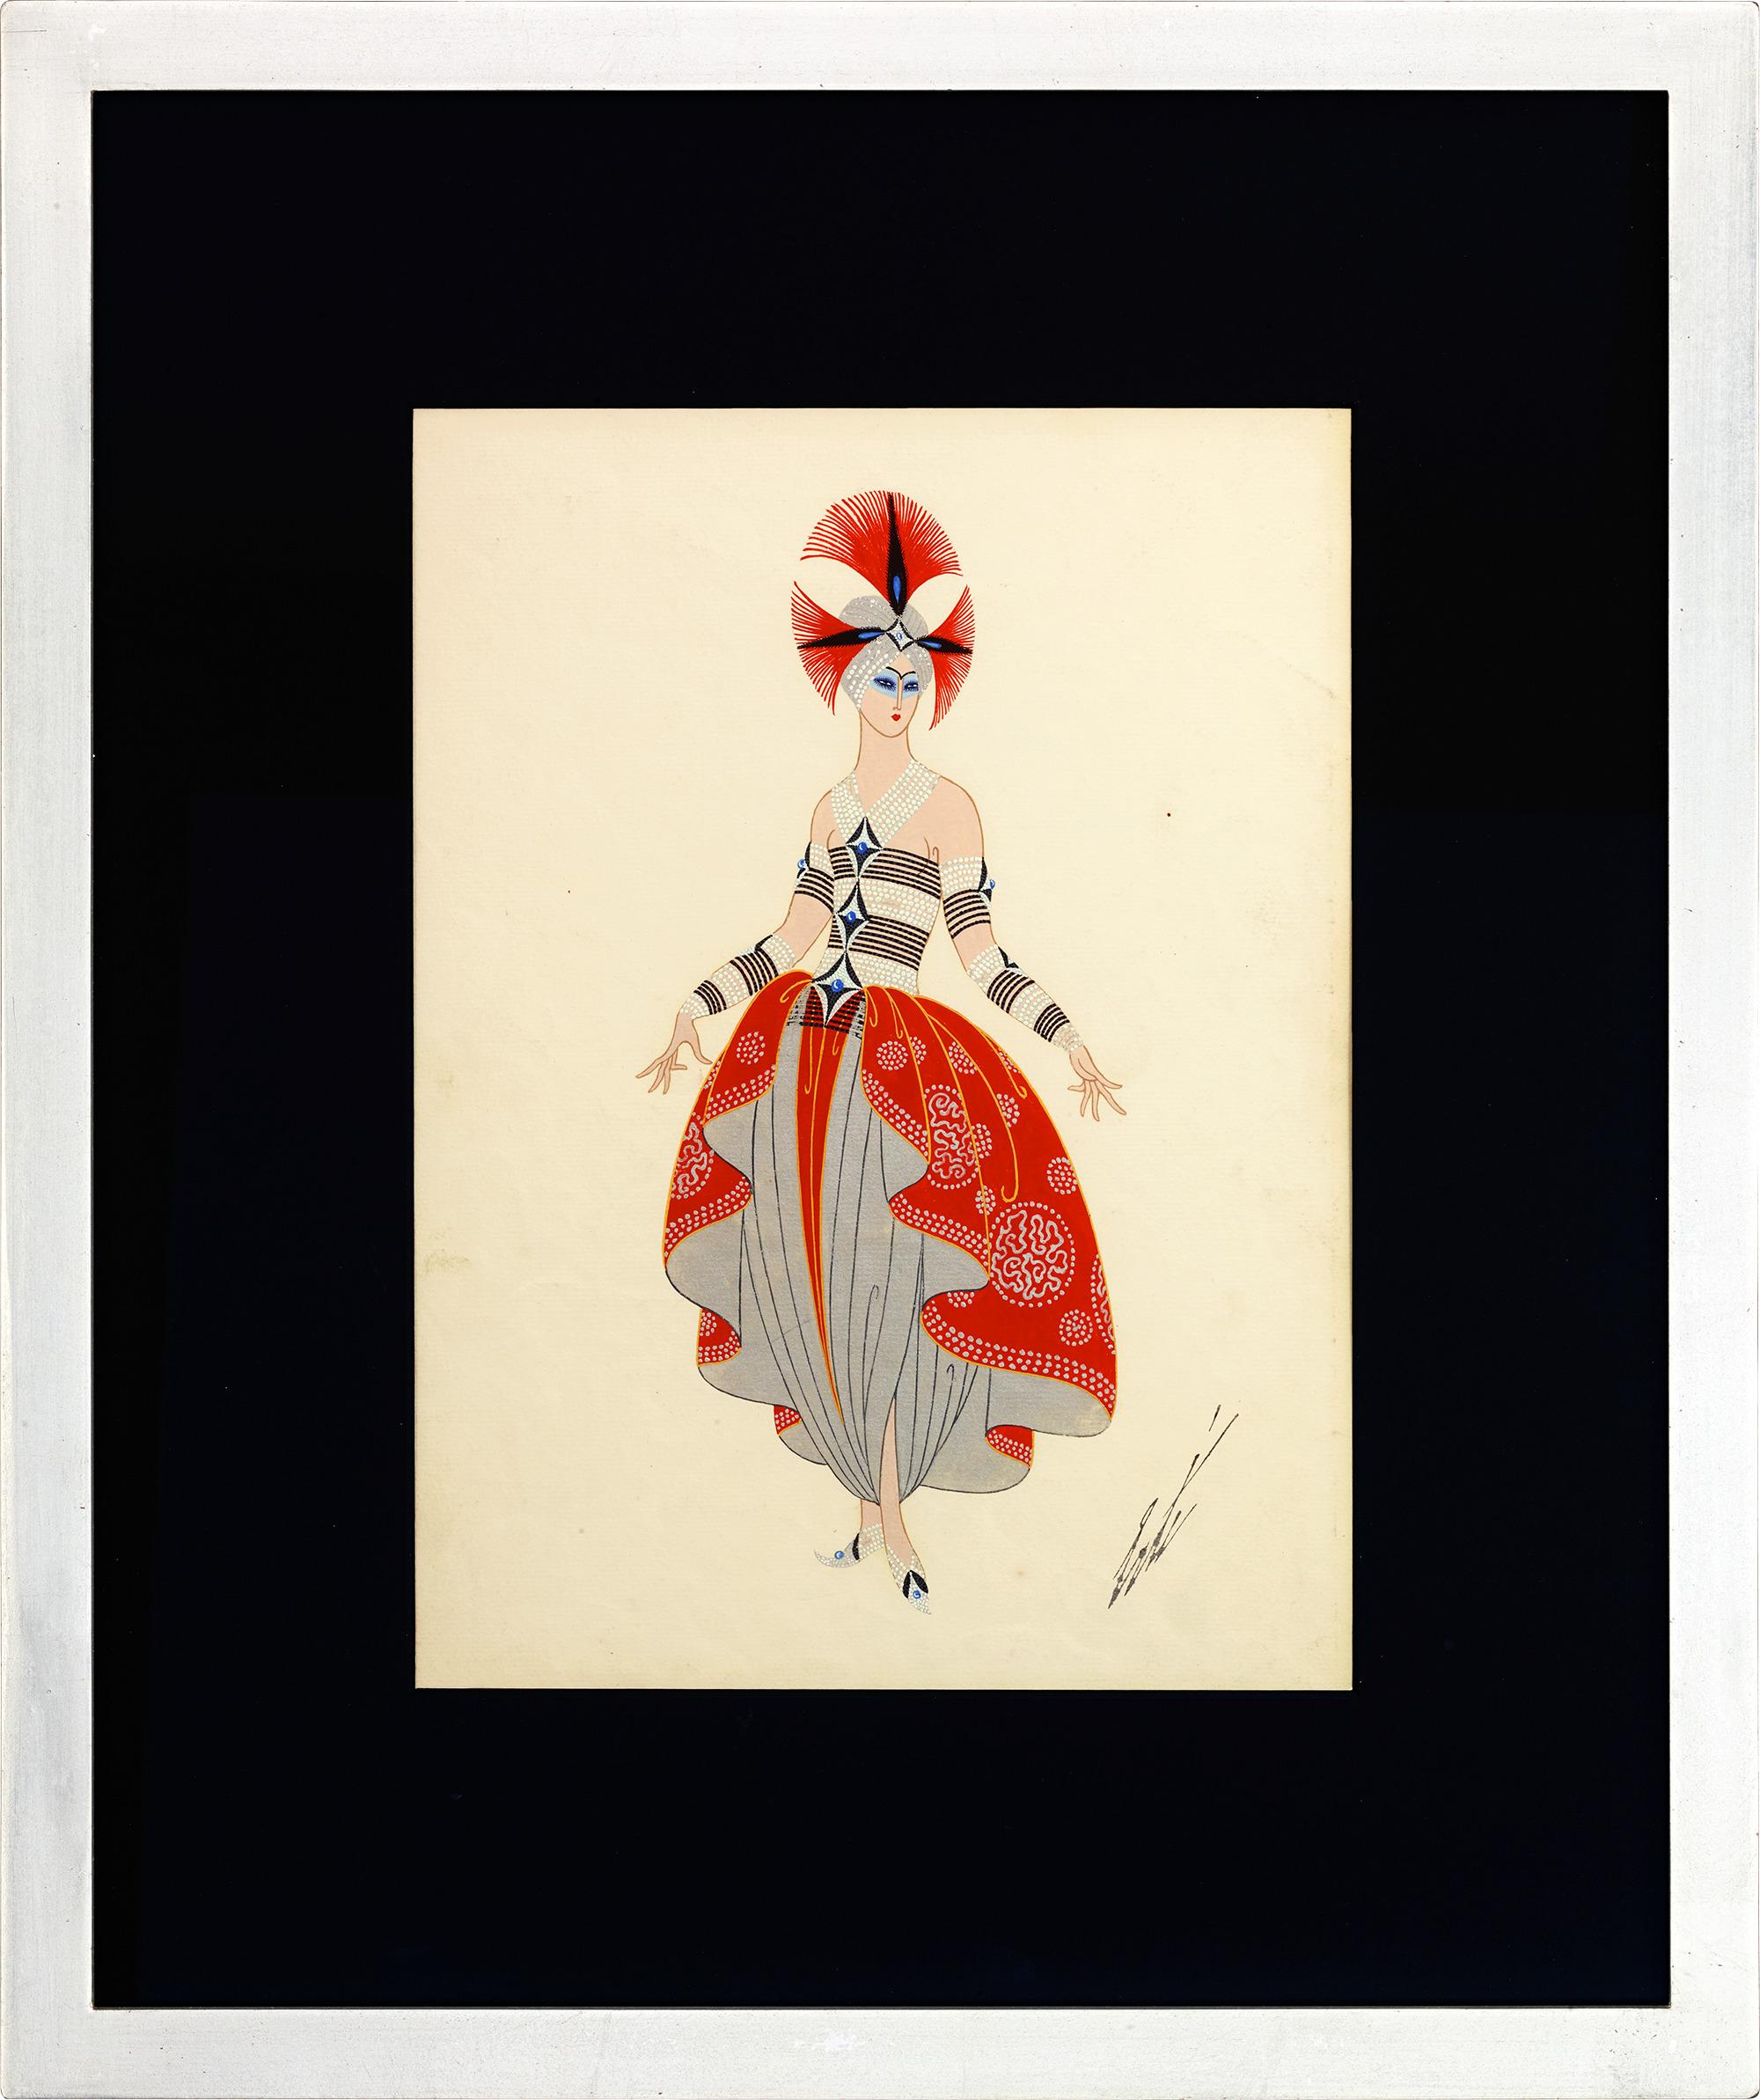 Erté (Romain de Tirtoff)
1892-1990 | Russian-French

Costume Oriental

Signed “Erté”(lower right)
Inscribed 